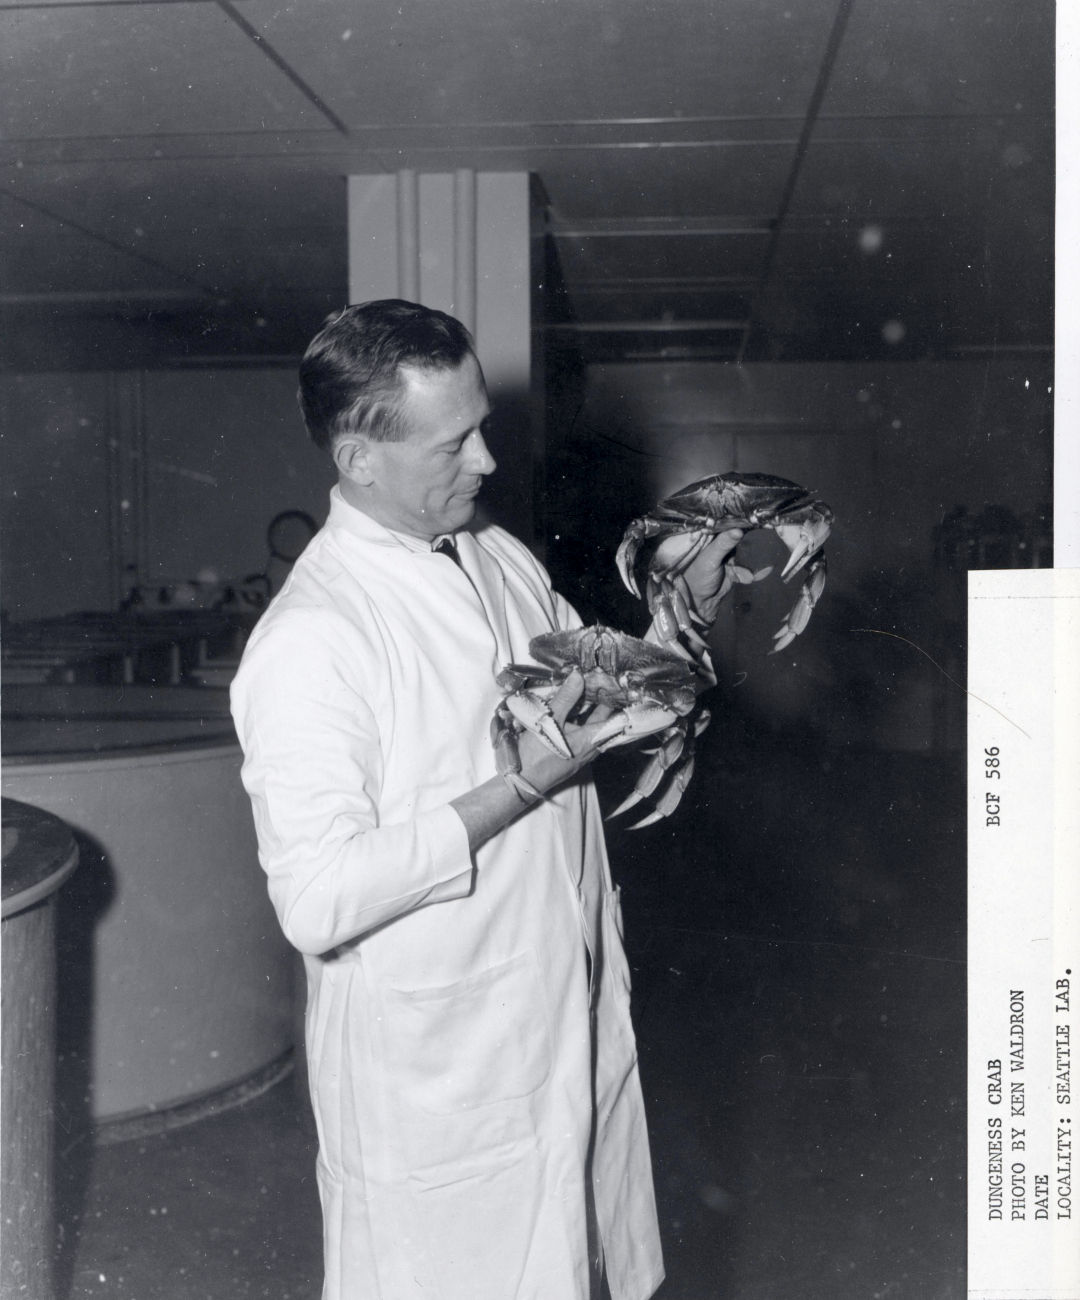 Seattle laboratory fisheries scientist with dungeness crabs (Cancer magister)